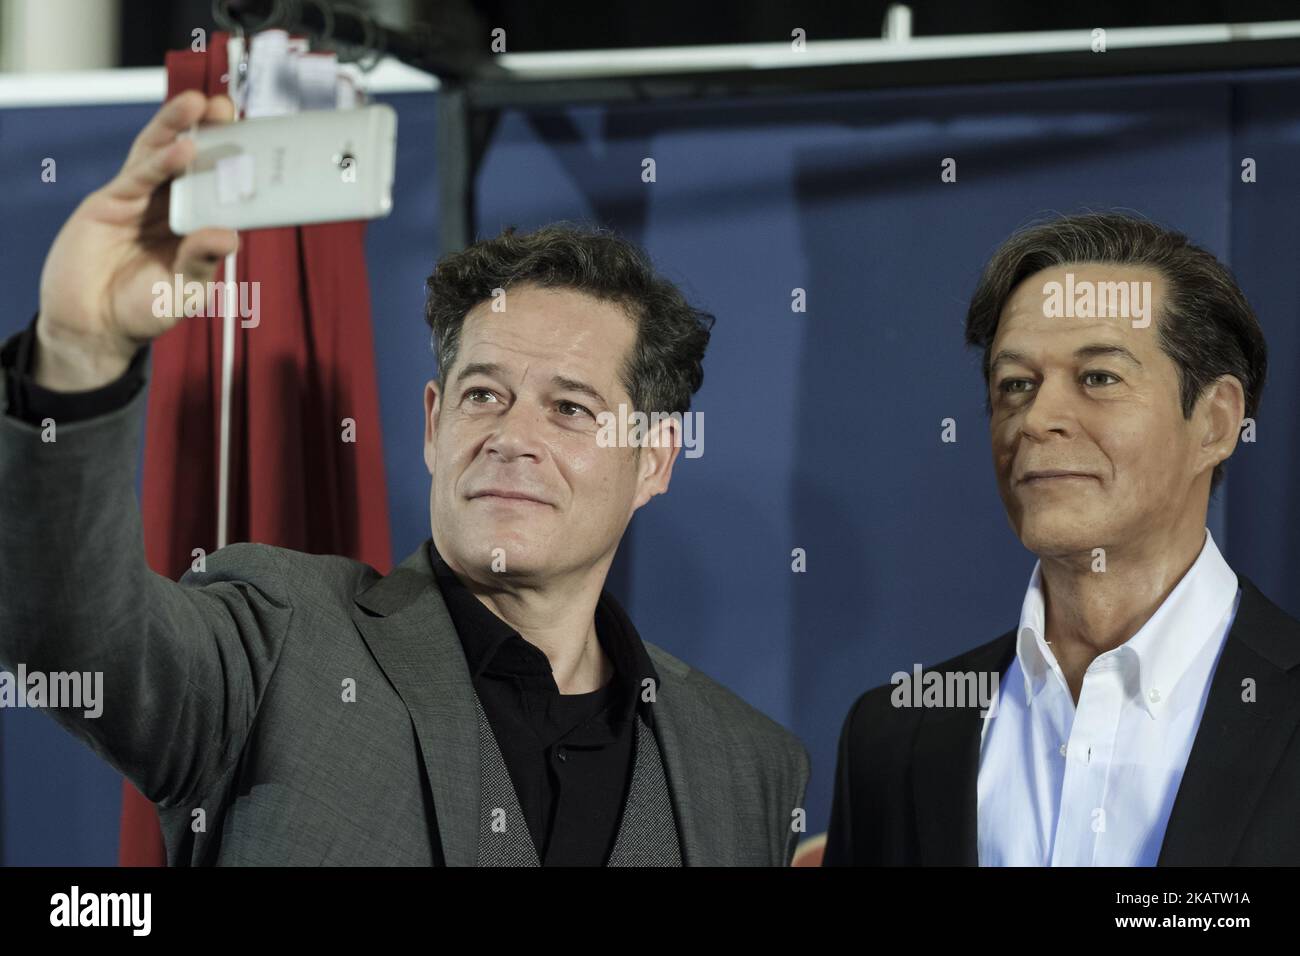 Spanish the actor Jorge Sanz unveils his wax figure at the Wax Museum on December 13, 2017 in Madrid, Spain (Photo by Oscar Gonzalez/NurPhoto) Stock Photo